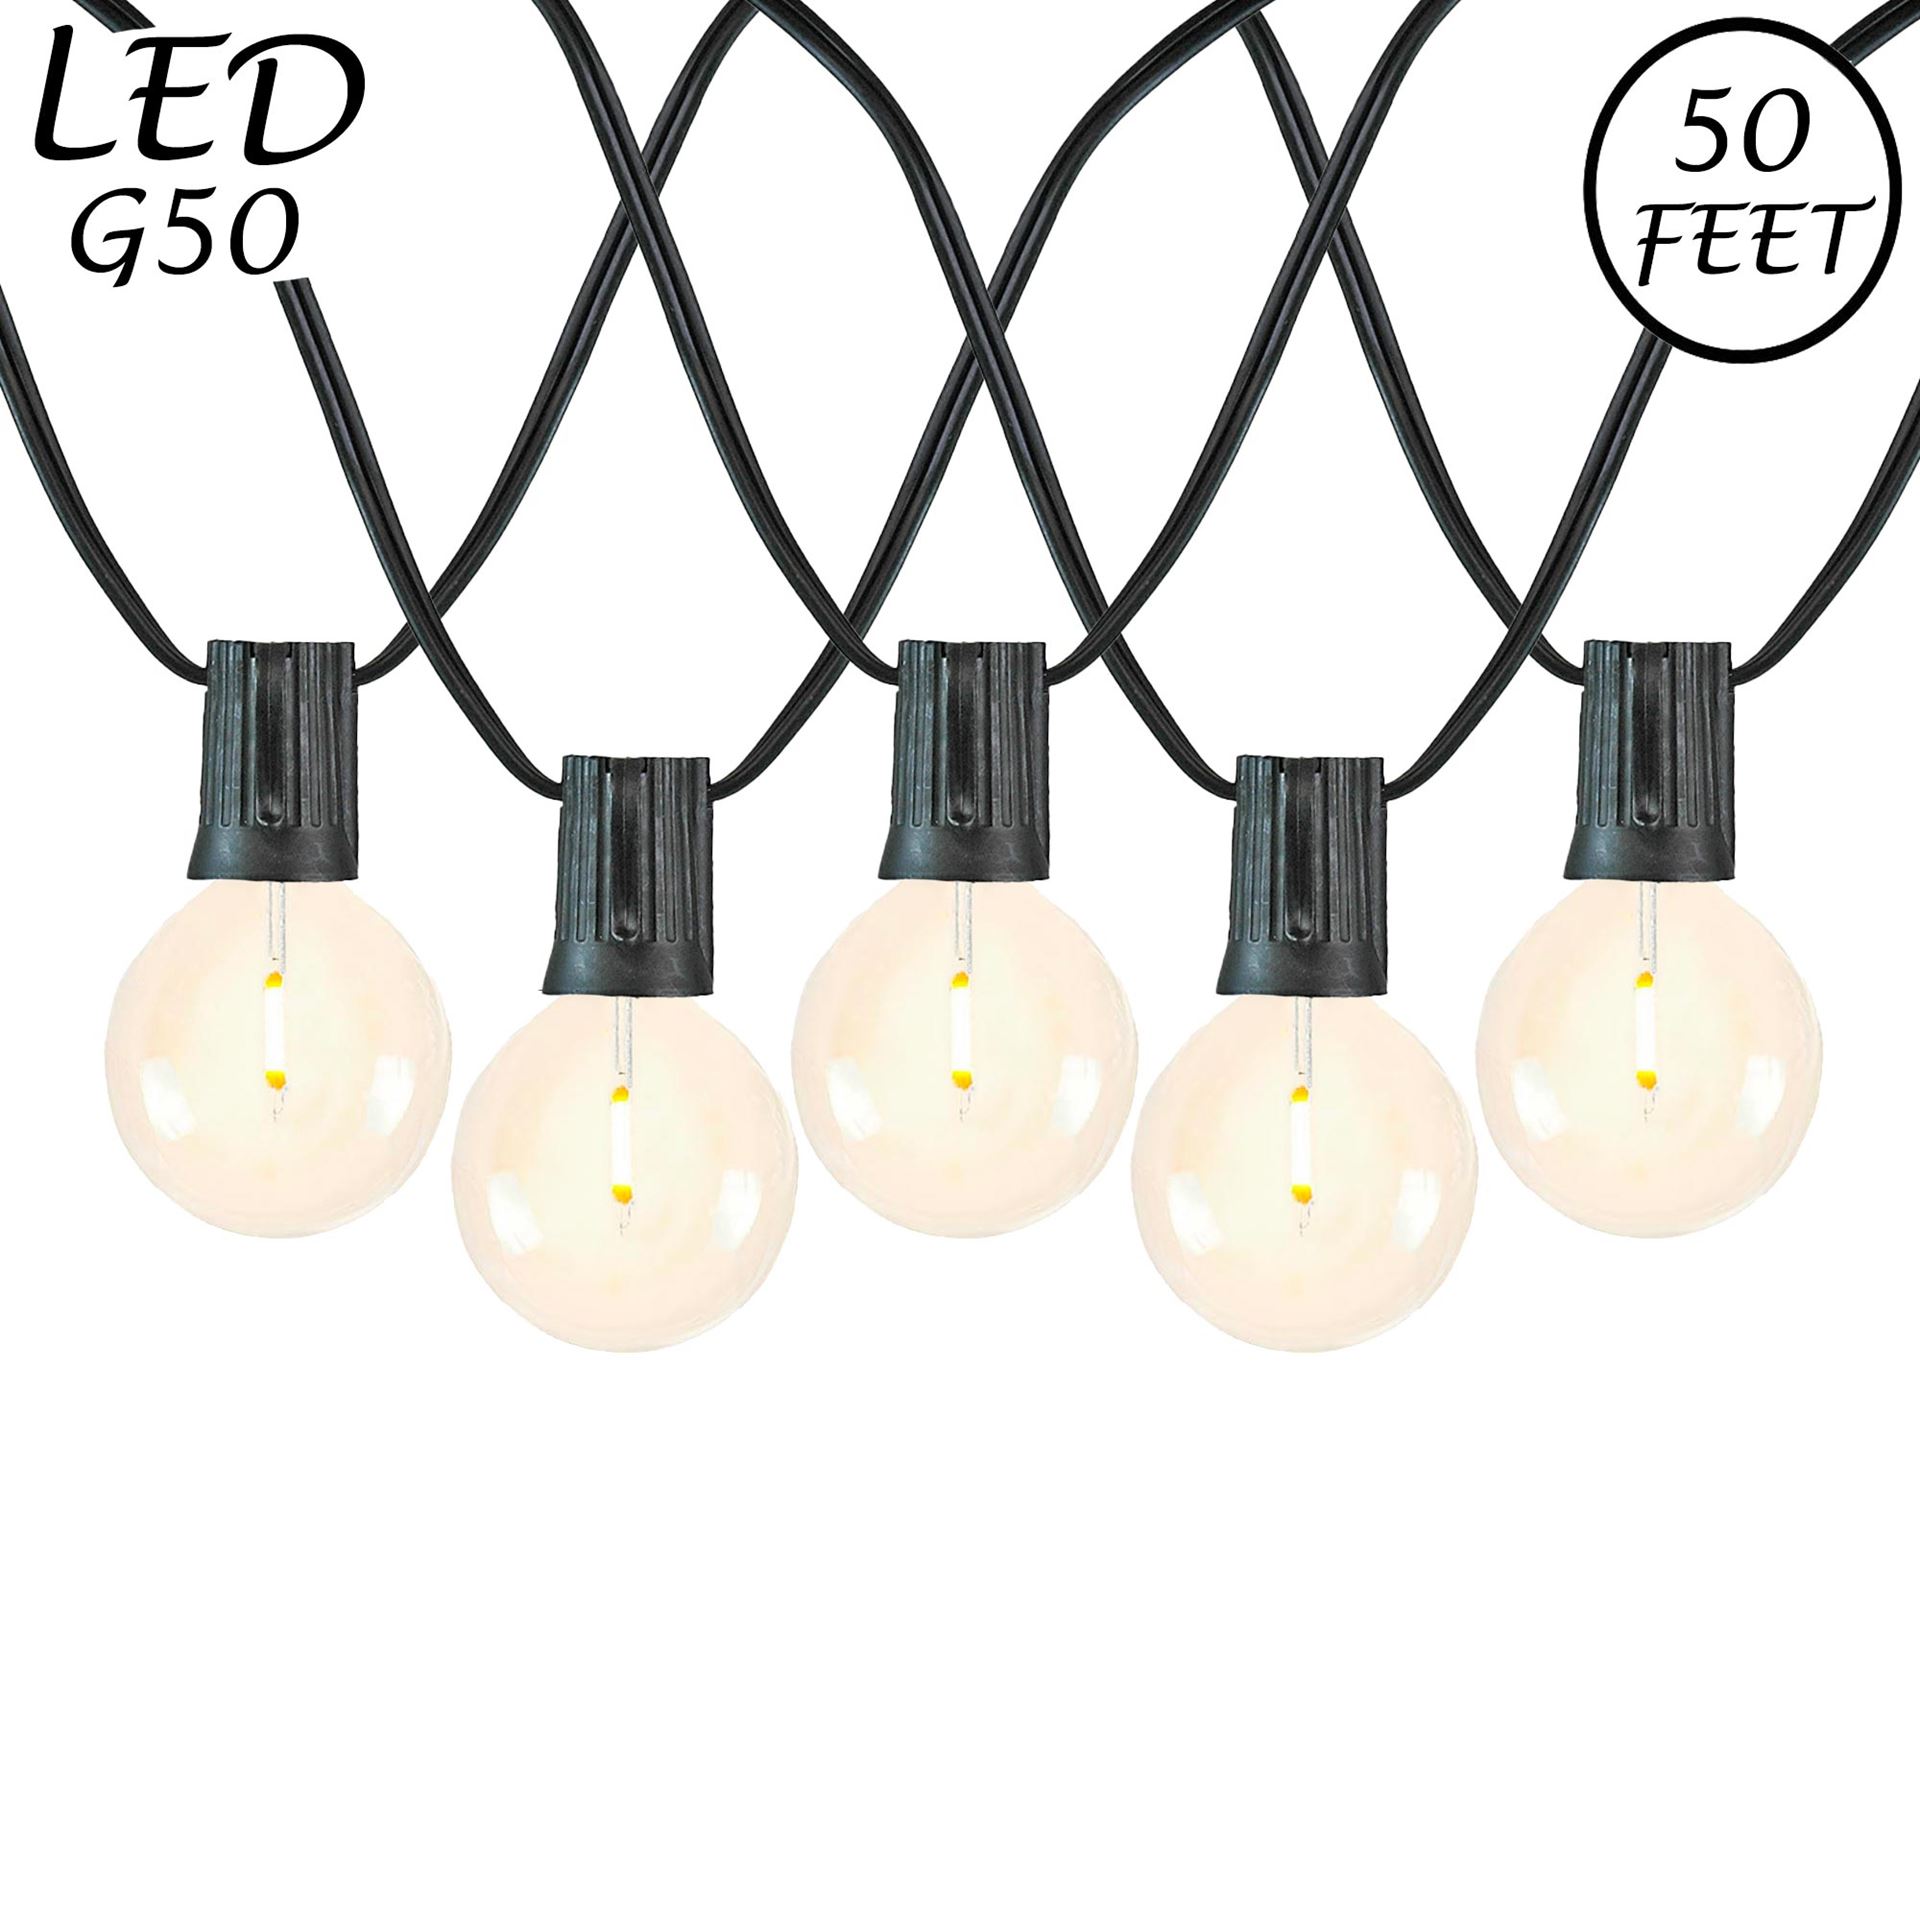 Picture of 50 LED Filament G50 Globe String Light Set with Warm White Bulbs on Black Wire